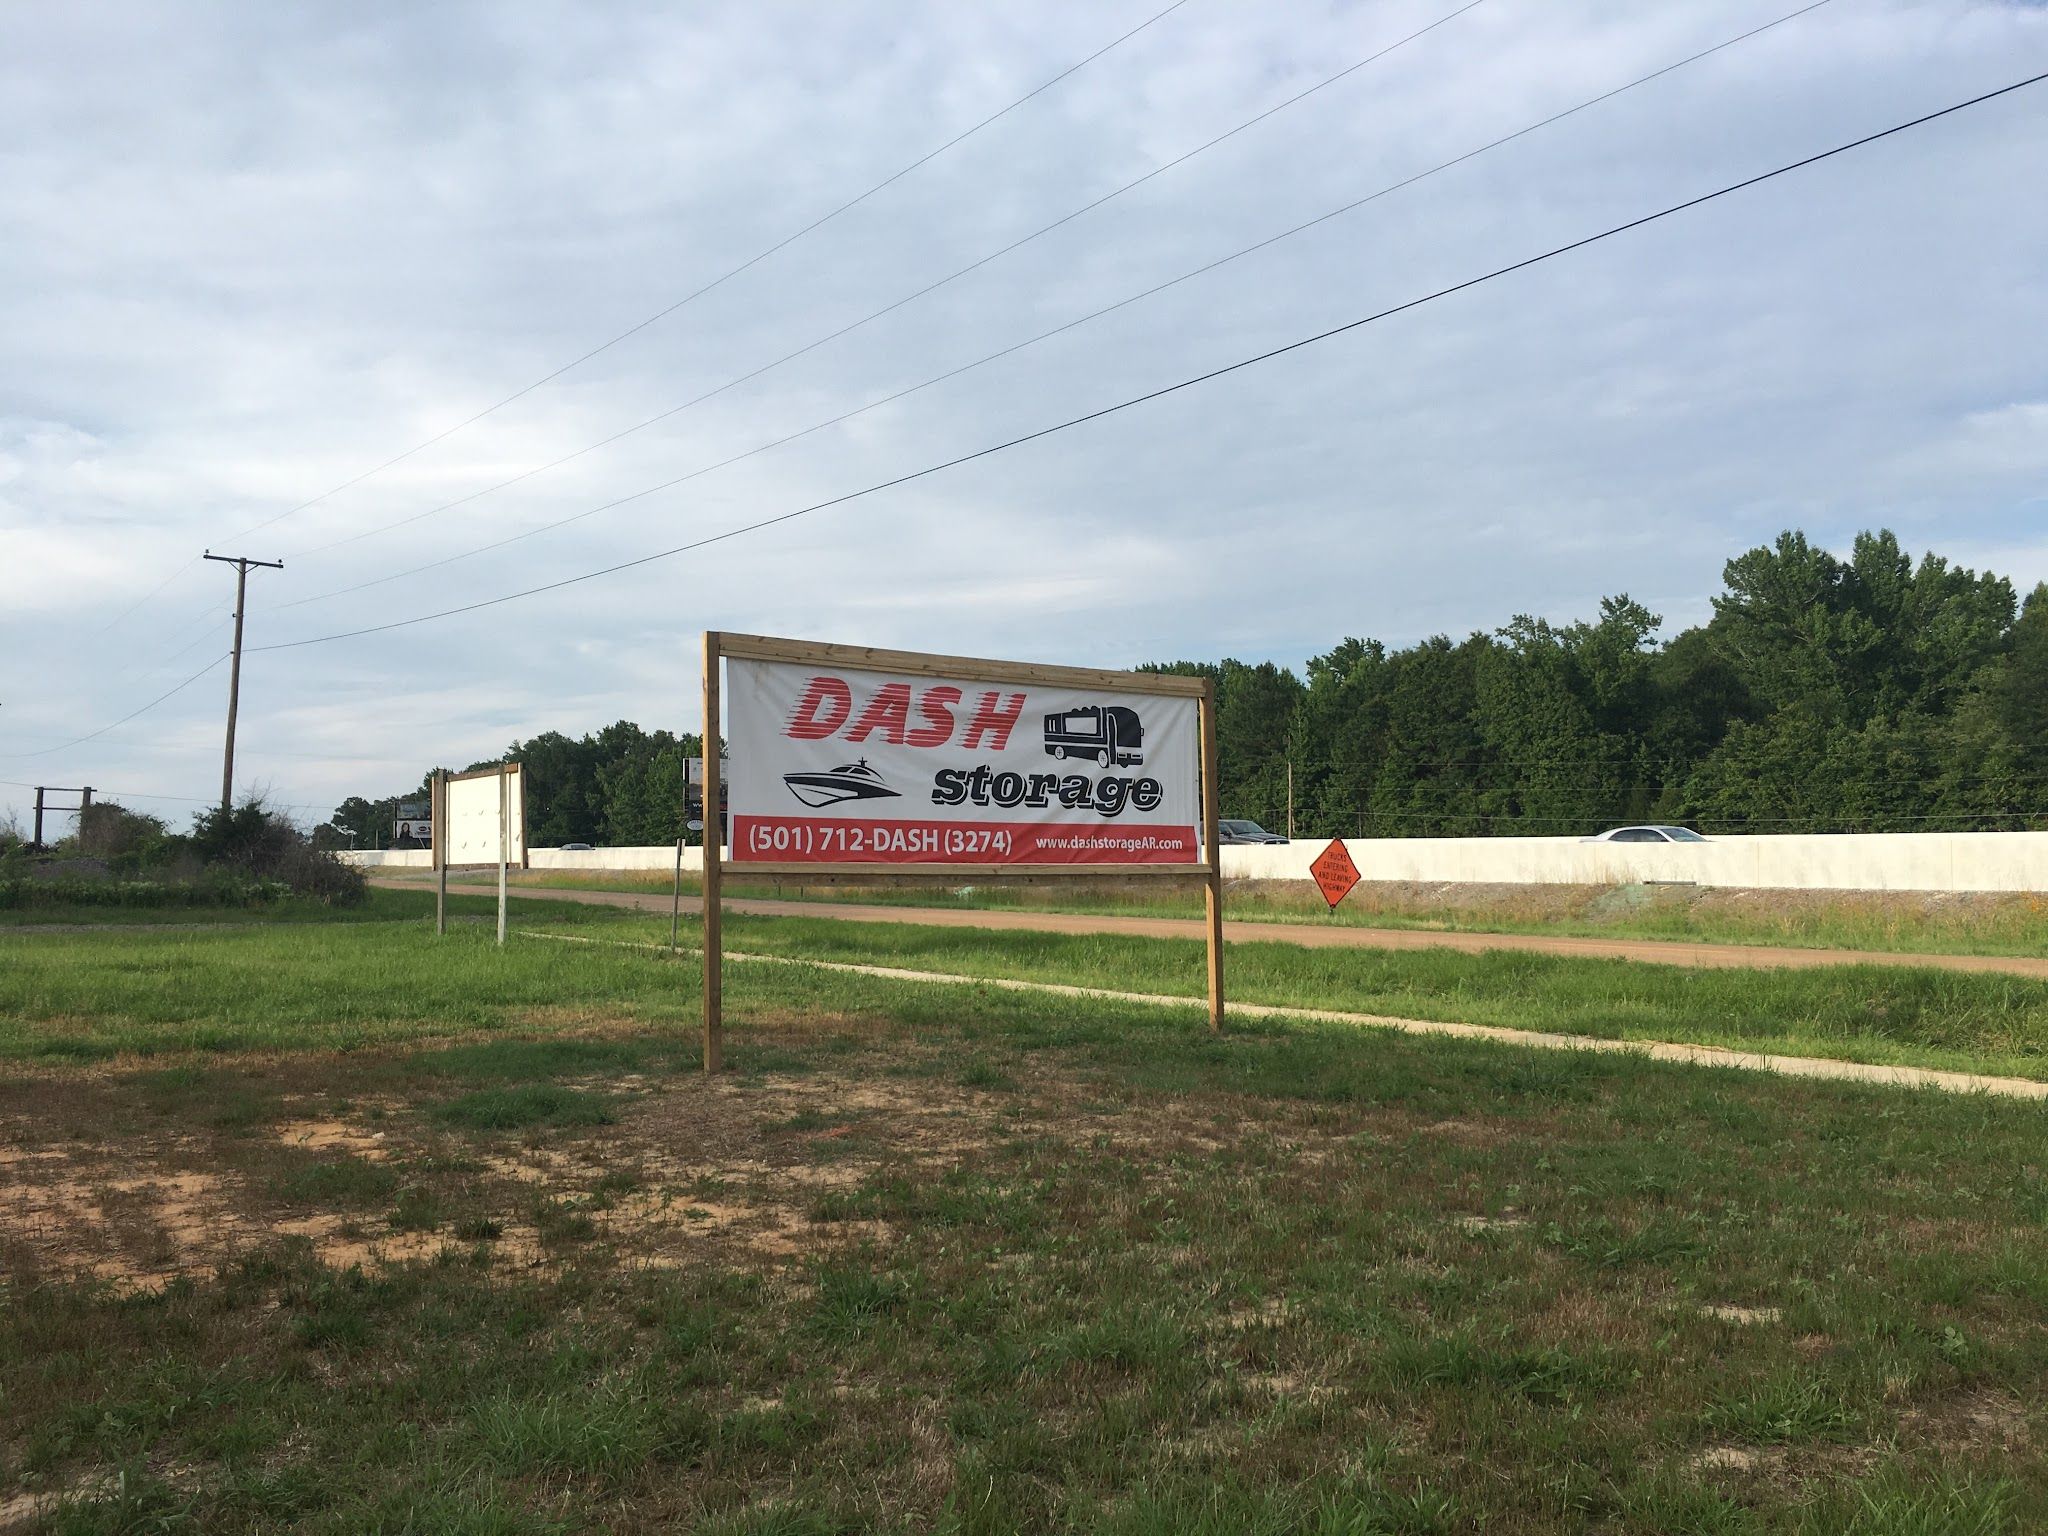 Services & Products DASH Storage in Jacksonville AR